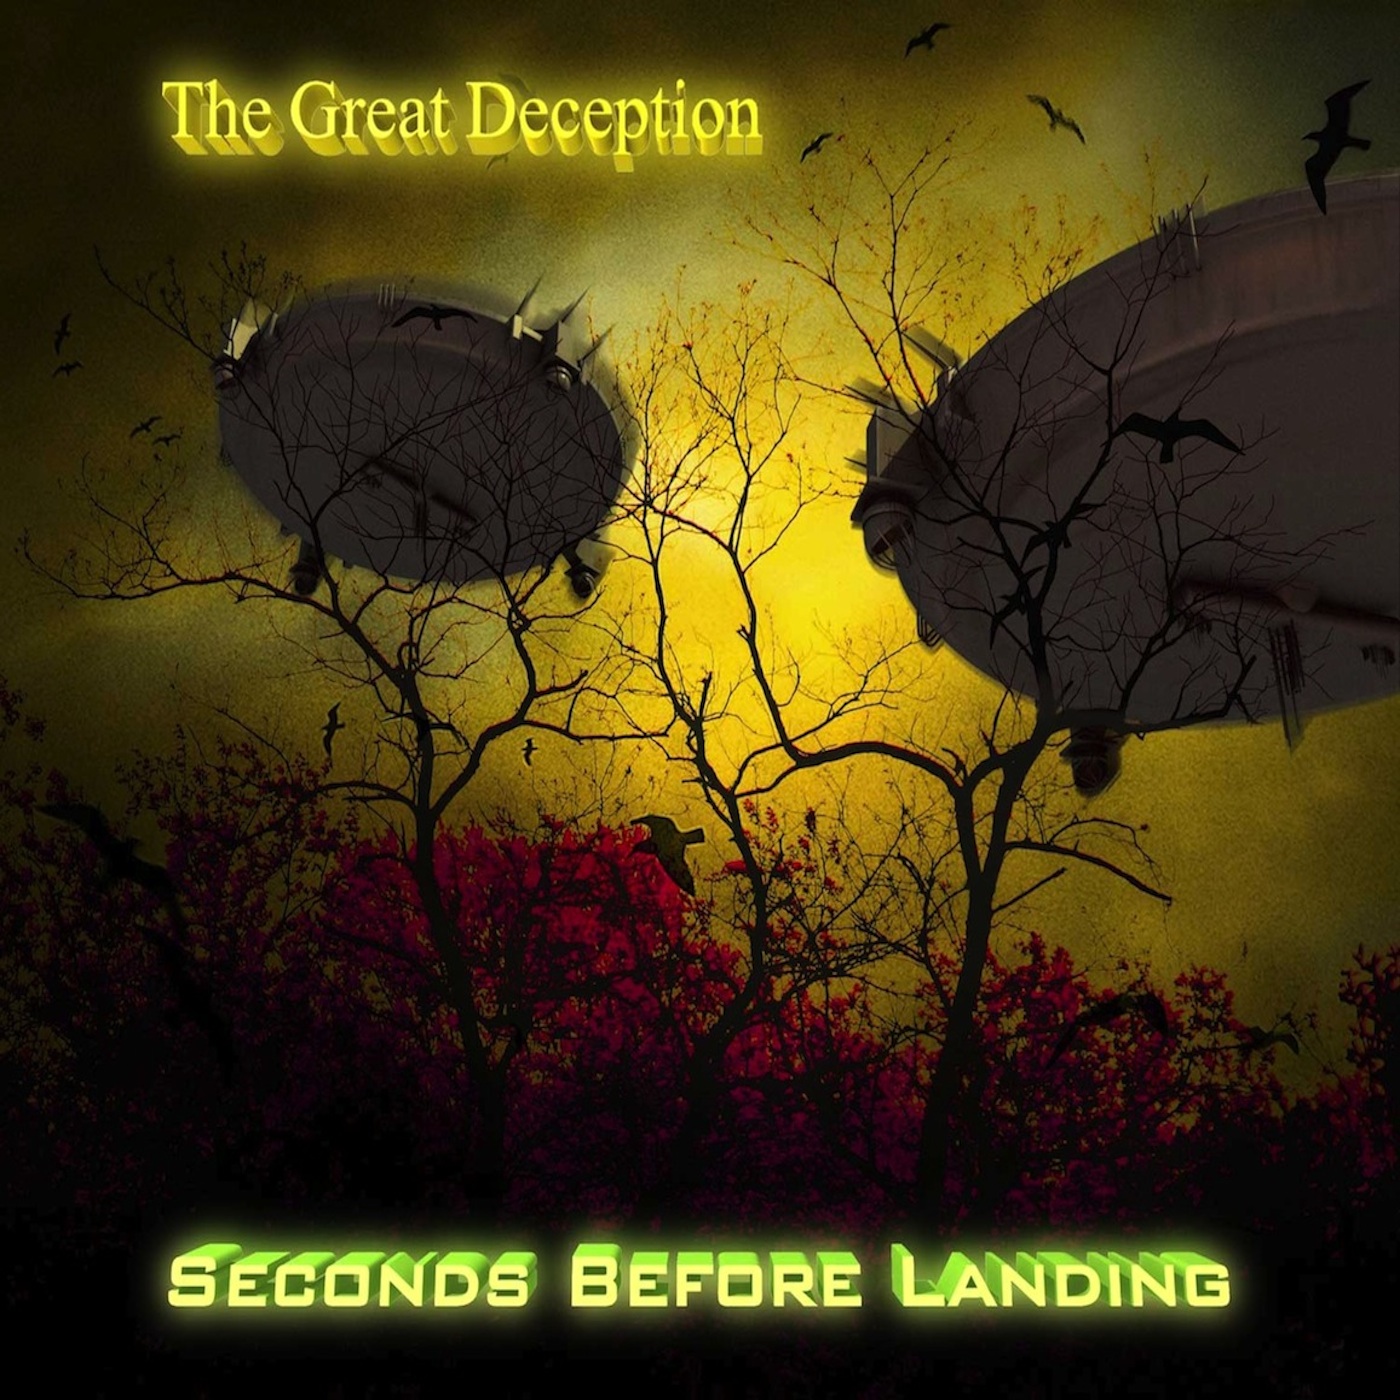 This is the cover for the new album The Great Deception, by Seconds Before Landing.